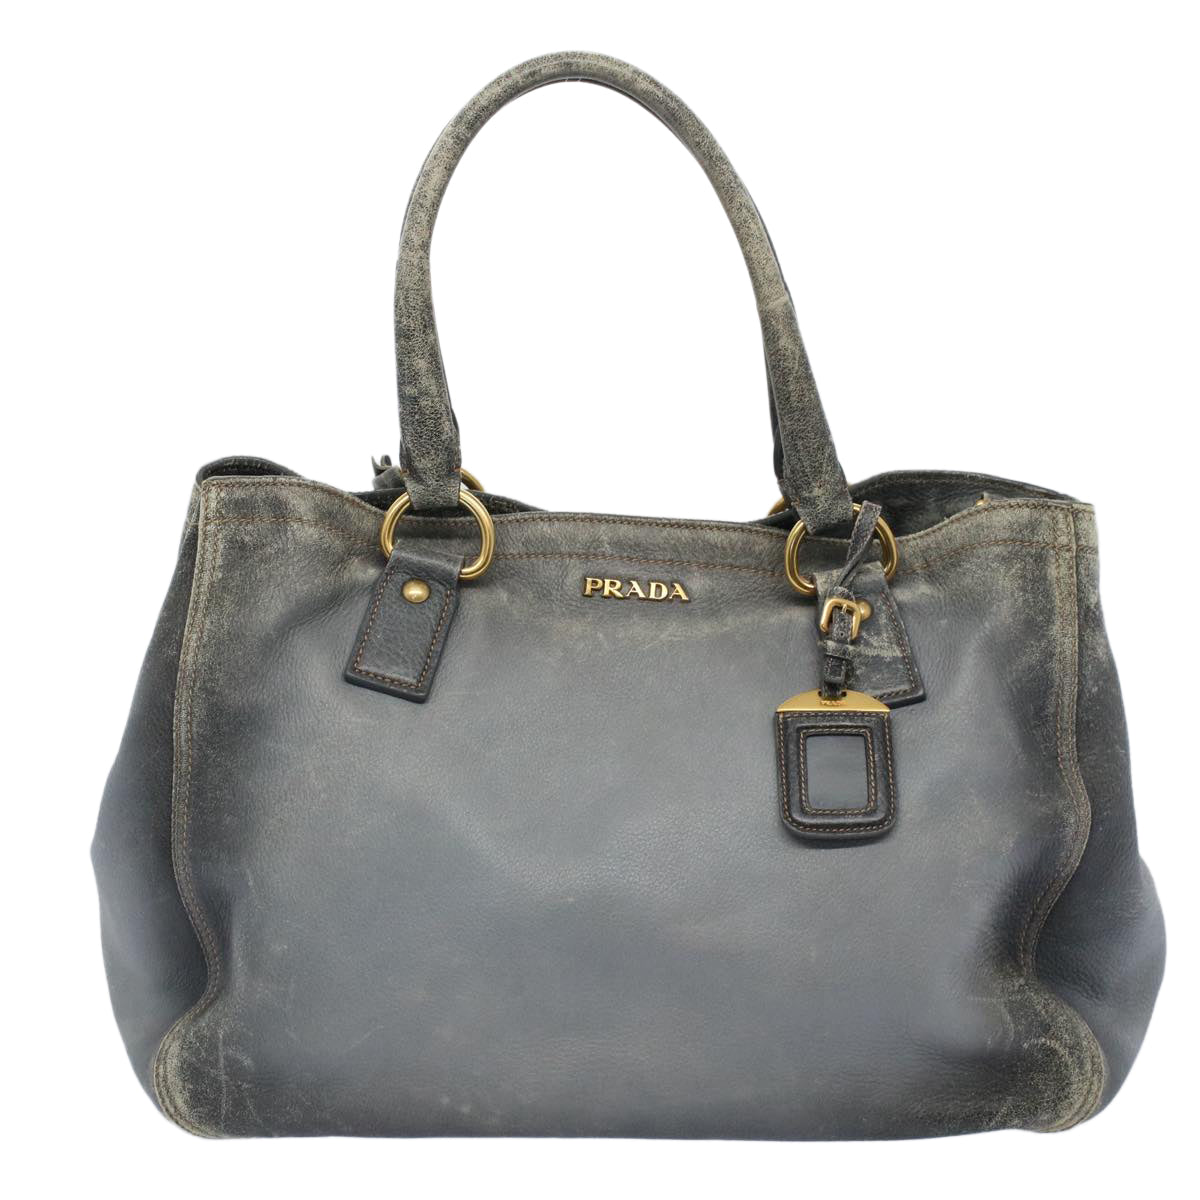 PRADA Tote Bag Leather 2way Gray Auth bs10117 - 0